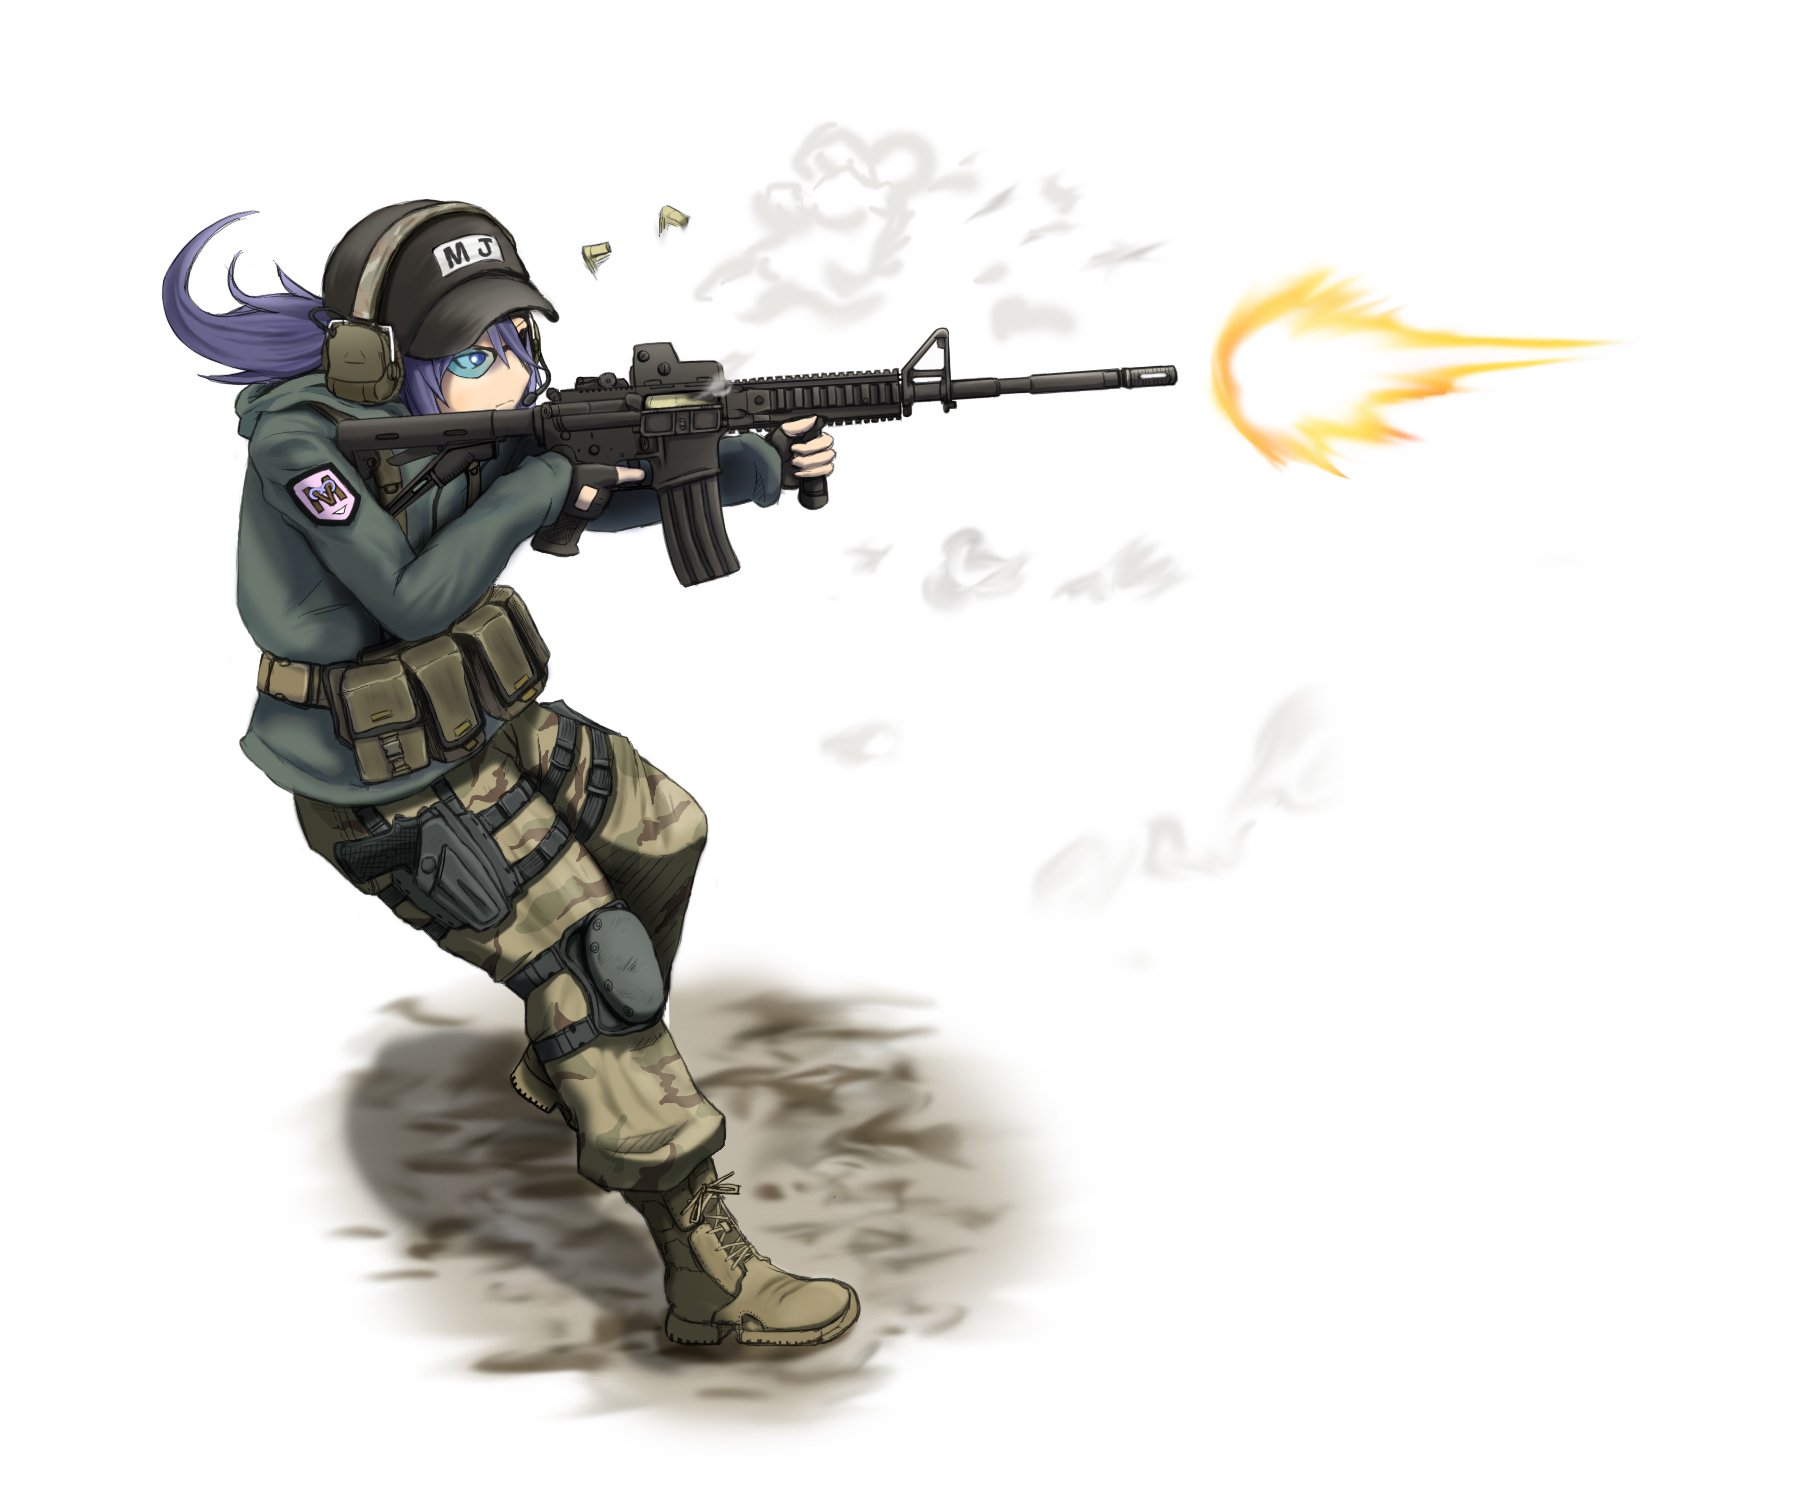 TACTICAL GIRL ANIME ILLUSTRATION - Artists&Clients